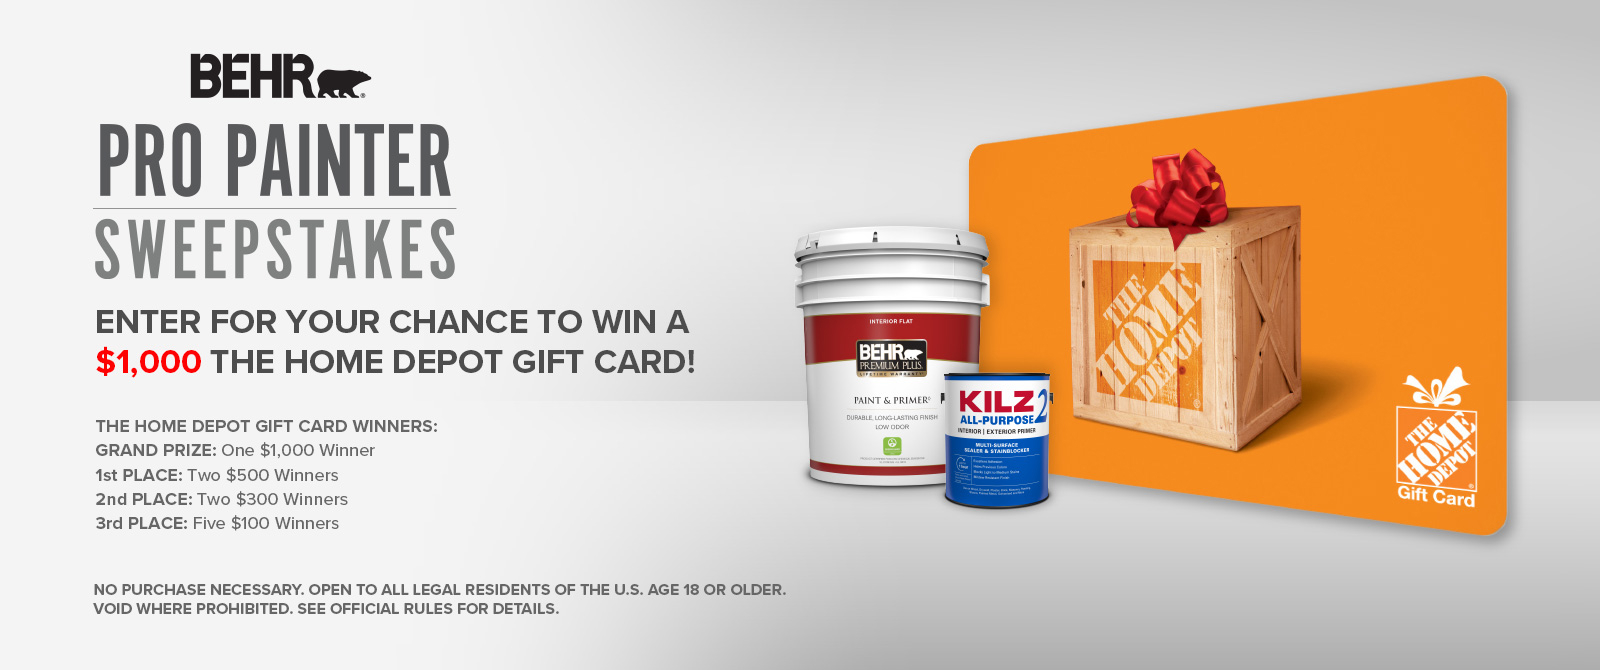 20234Pro Painter Sweepstakes - Enter for a Chance to Win $1,000 The Home Depot Gift Card